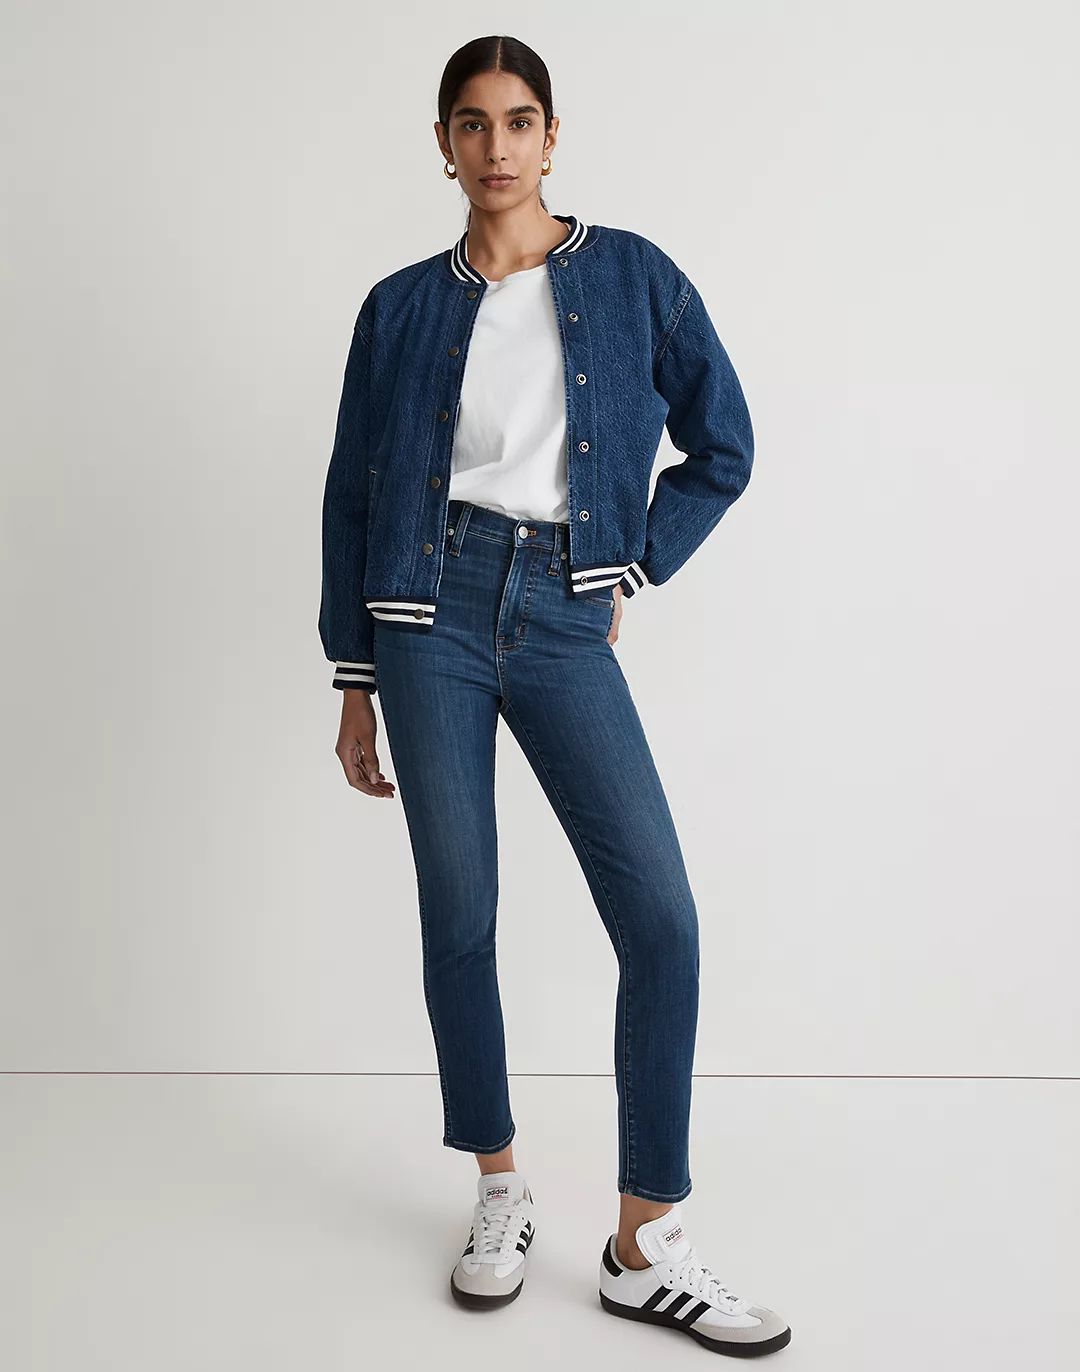 Stovepipe Jeans in Brentside Wash | Madewell